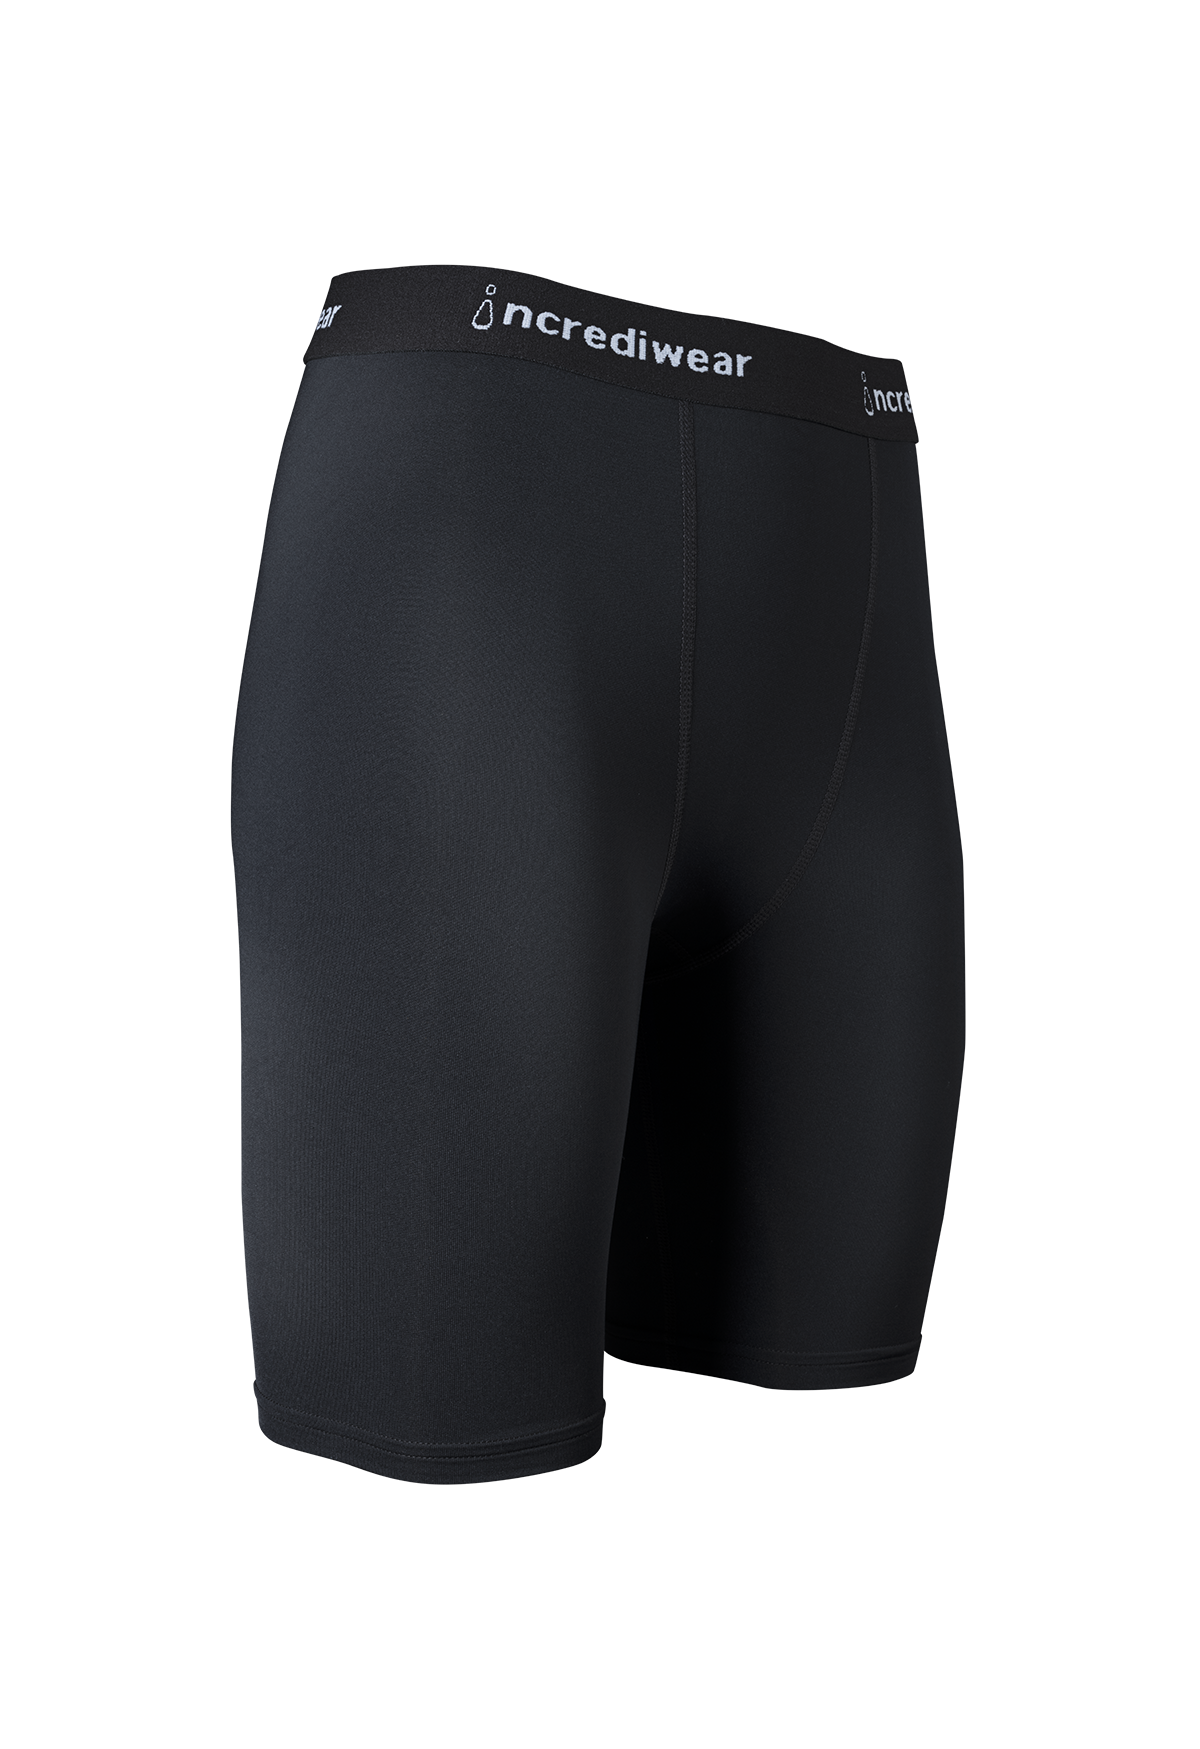 Incrediwear Circulation Shorts – Physician Recommended Recovery